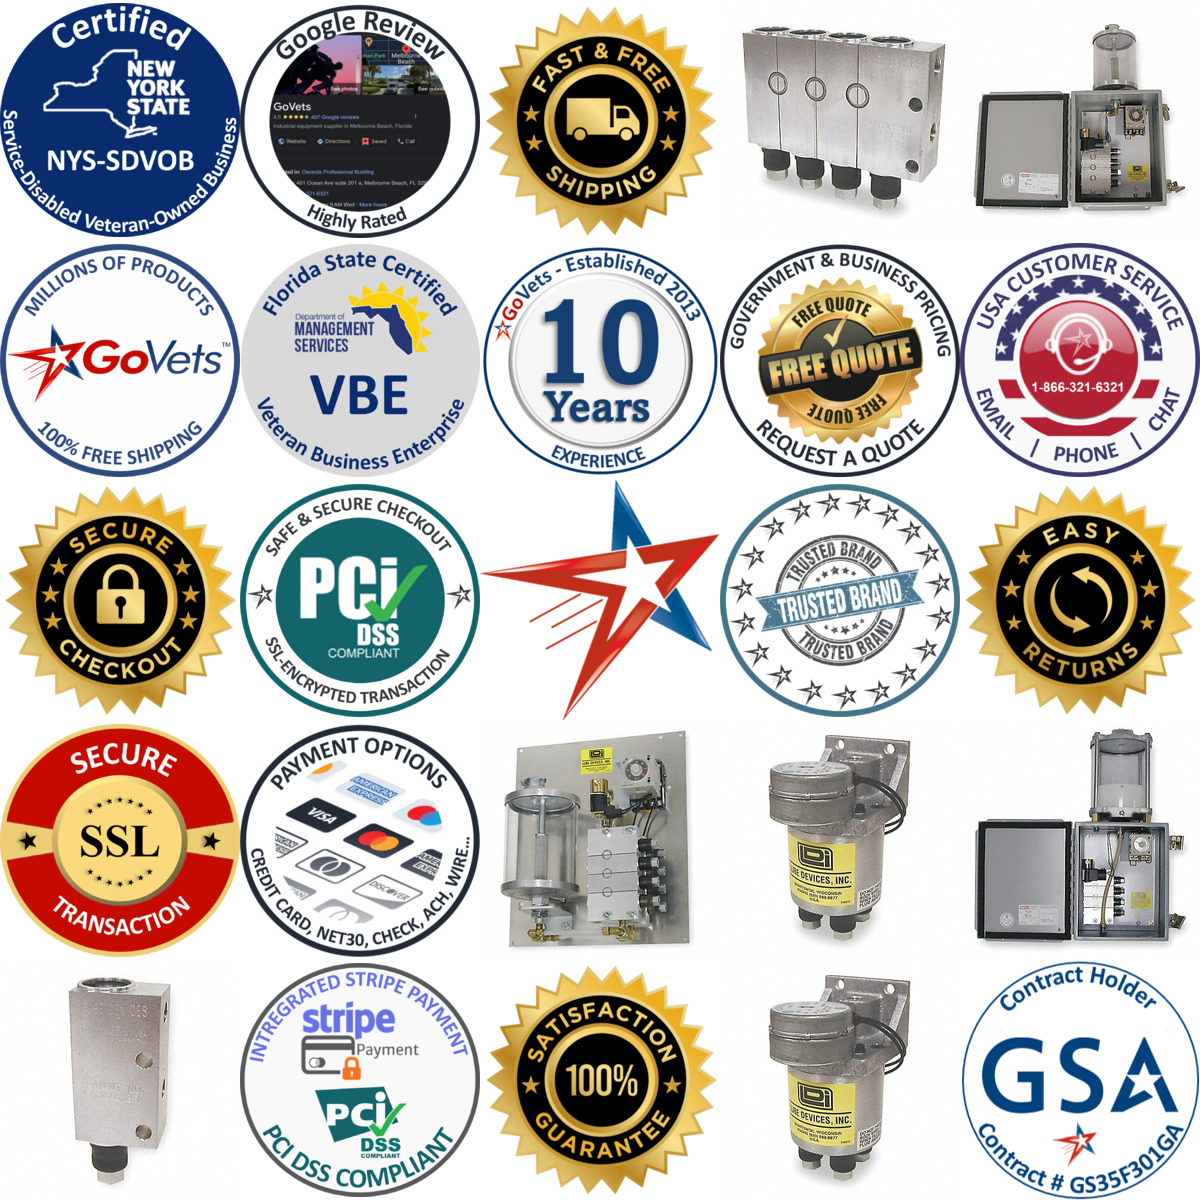 A selection of Precision Metering Lubrication Pumps products on GoVets